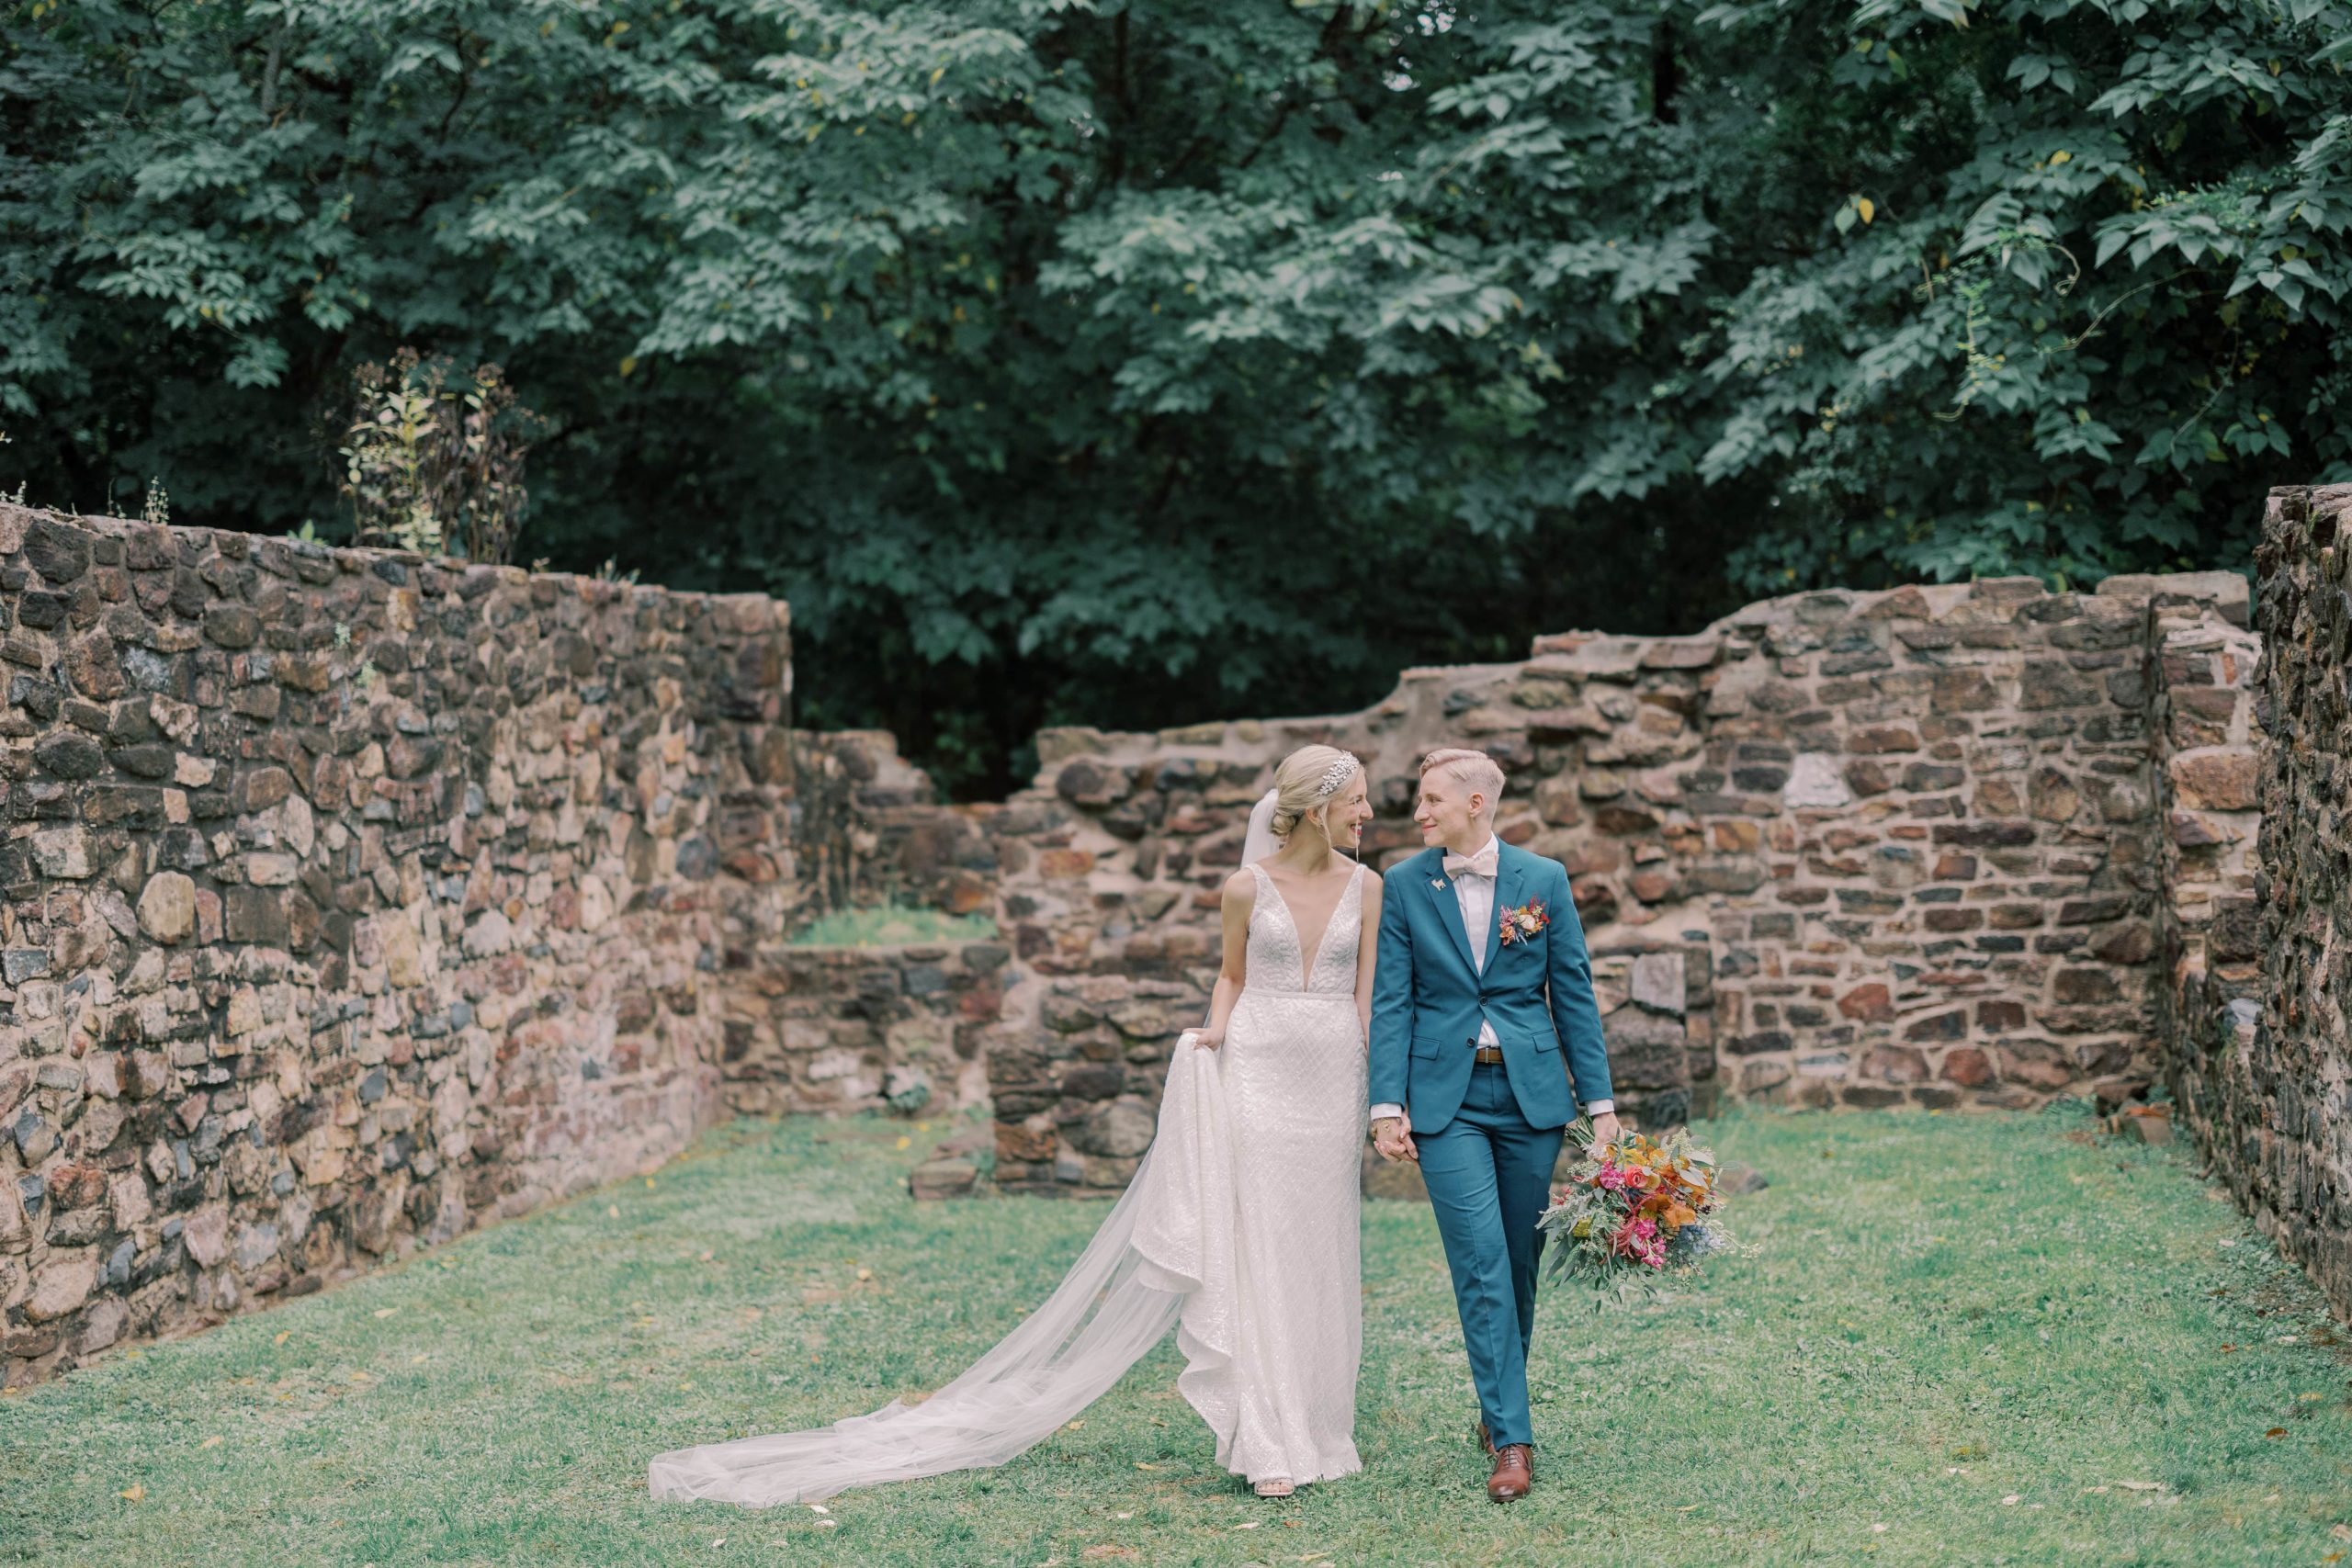 How Many Hours Should I Book my Wedding Photographer?